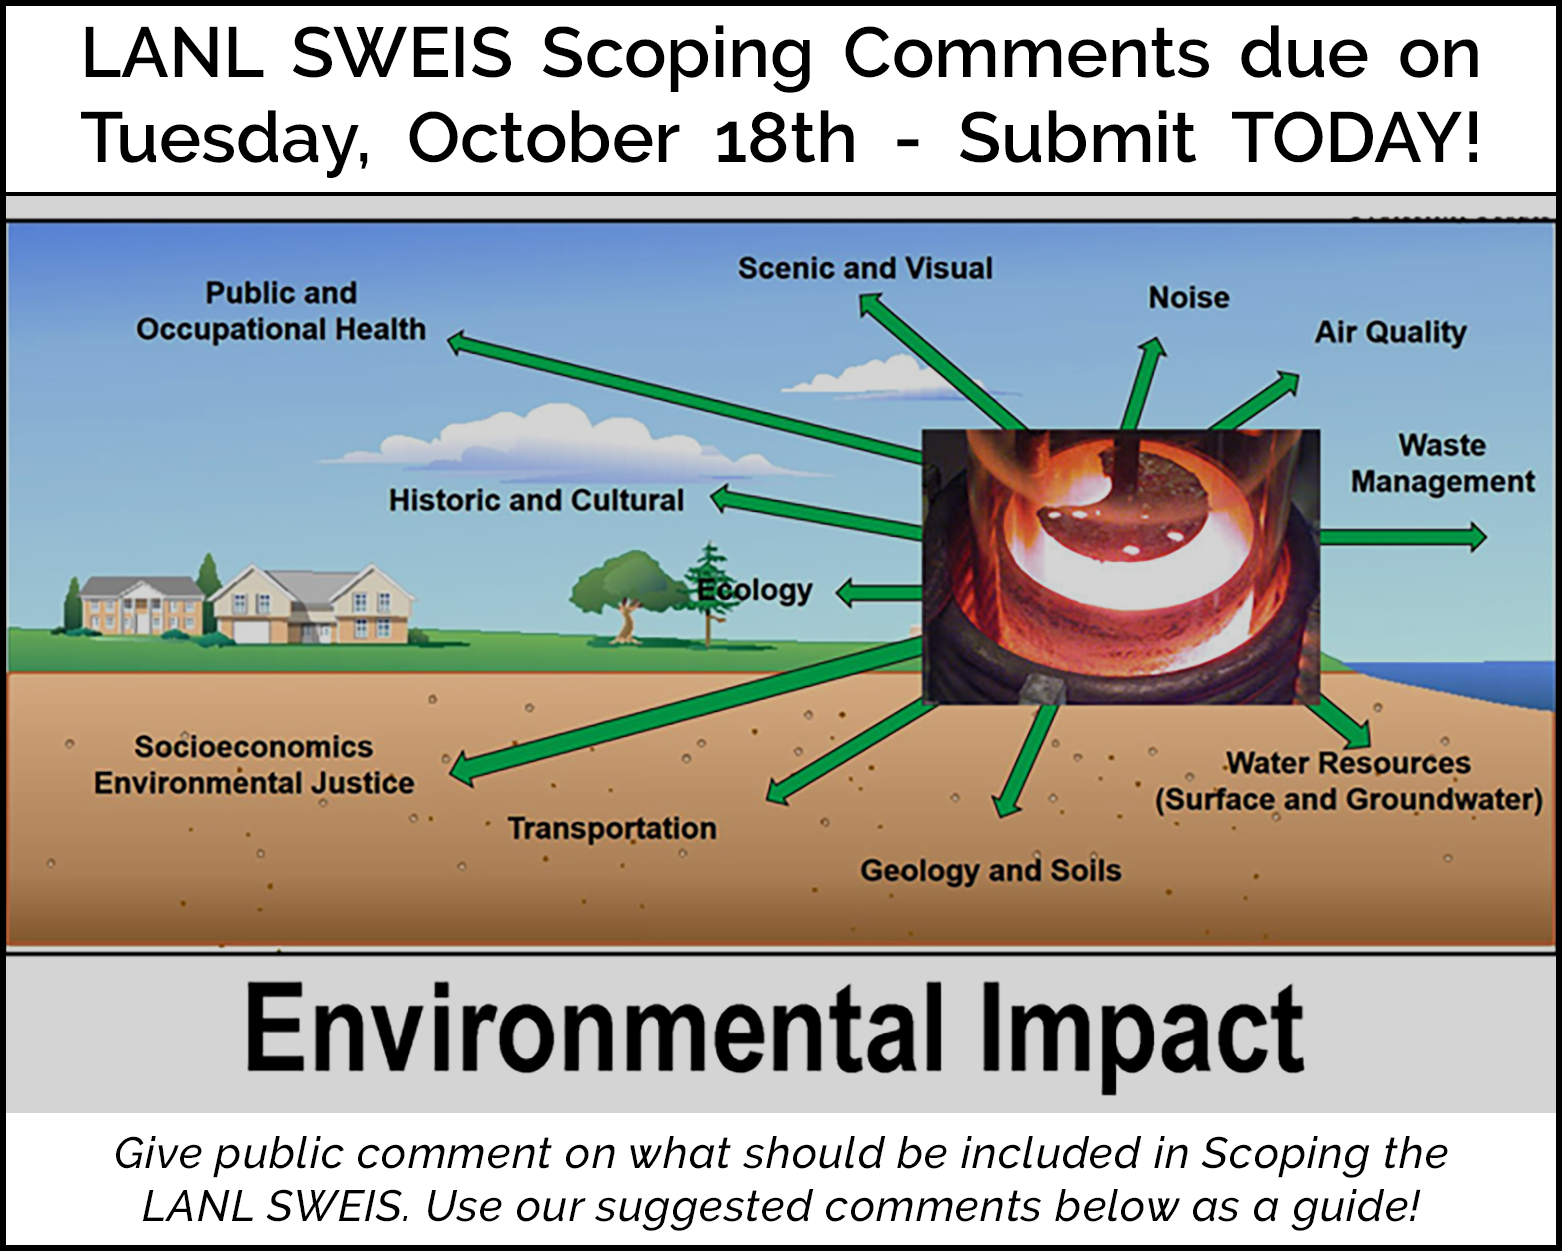 LANL SWEIS Scoping Comments due on Tuesday, October 18th - Submit TODAY!